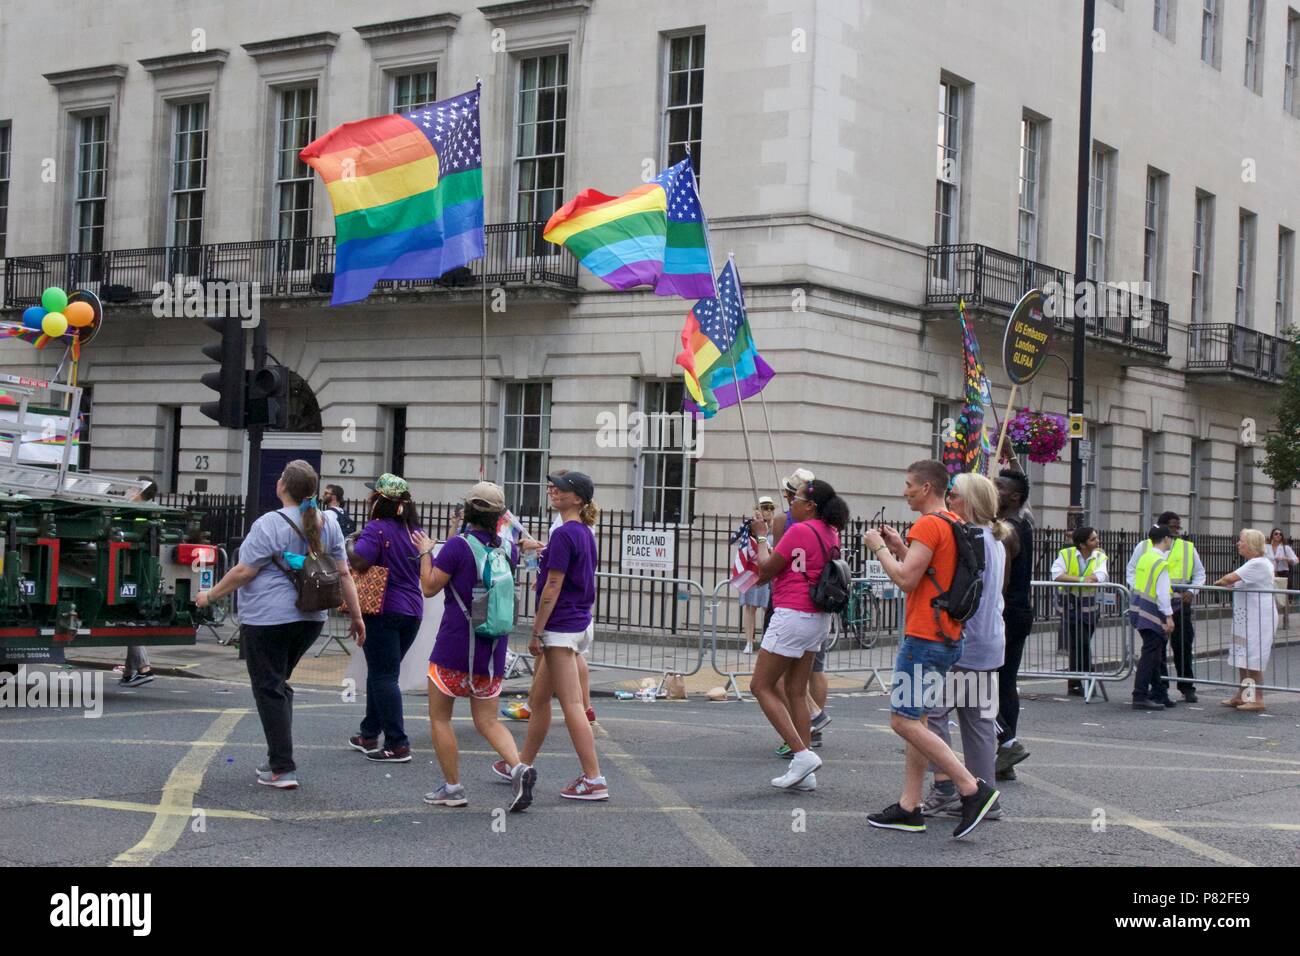 US embassy workers with rainbow US flags at Pride in London 2018 Parade Stock Photo